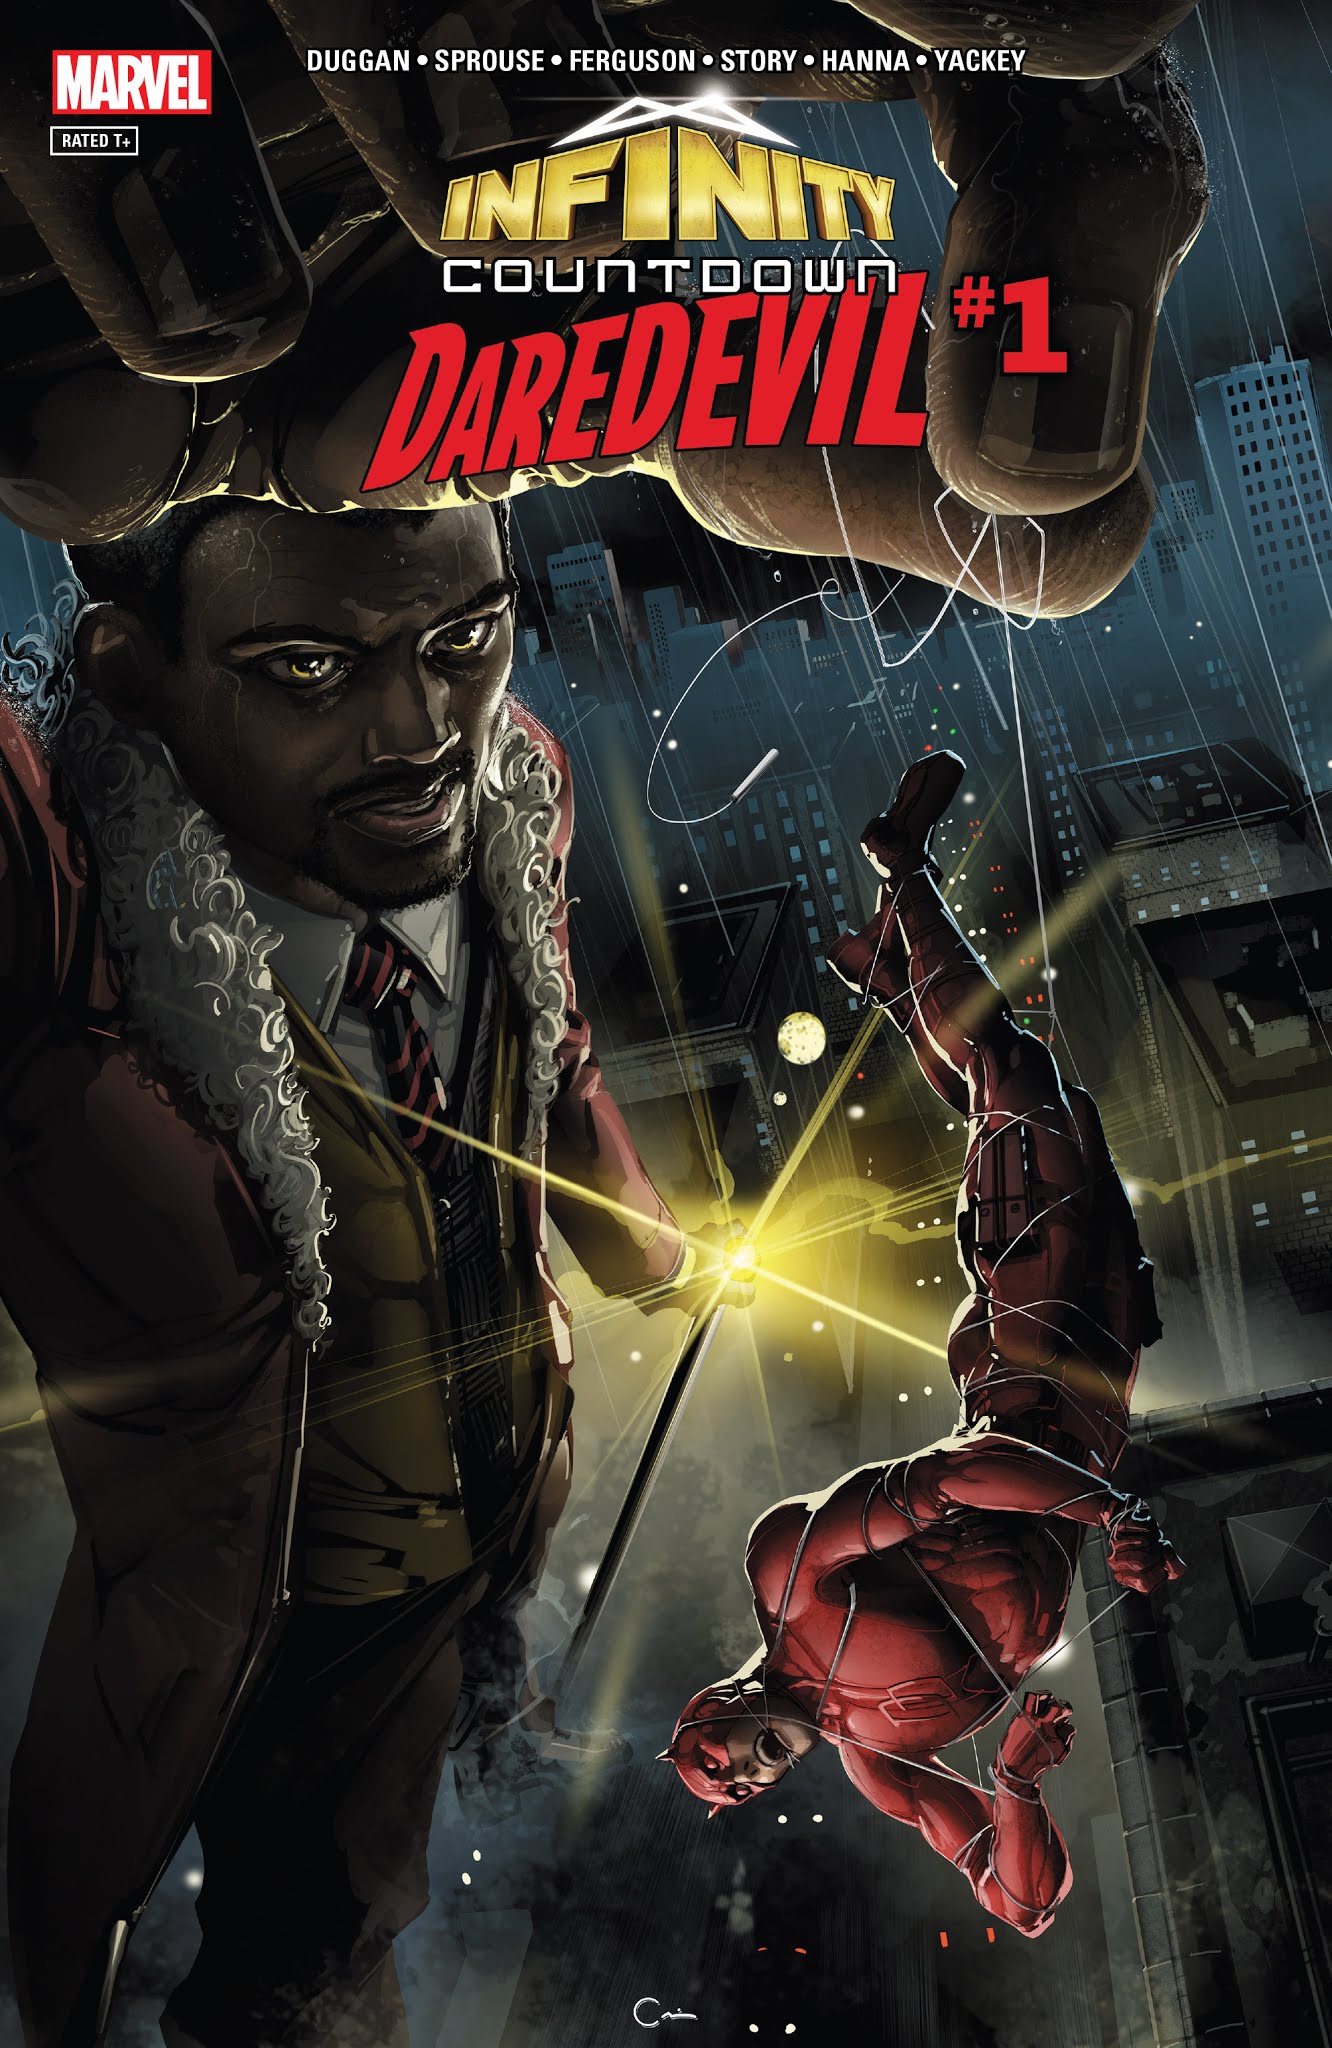 Read online Infinity Countdown: Daredevil comic -  Issue # Full - 1